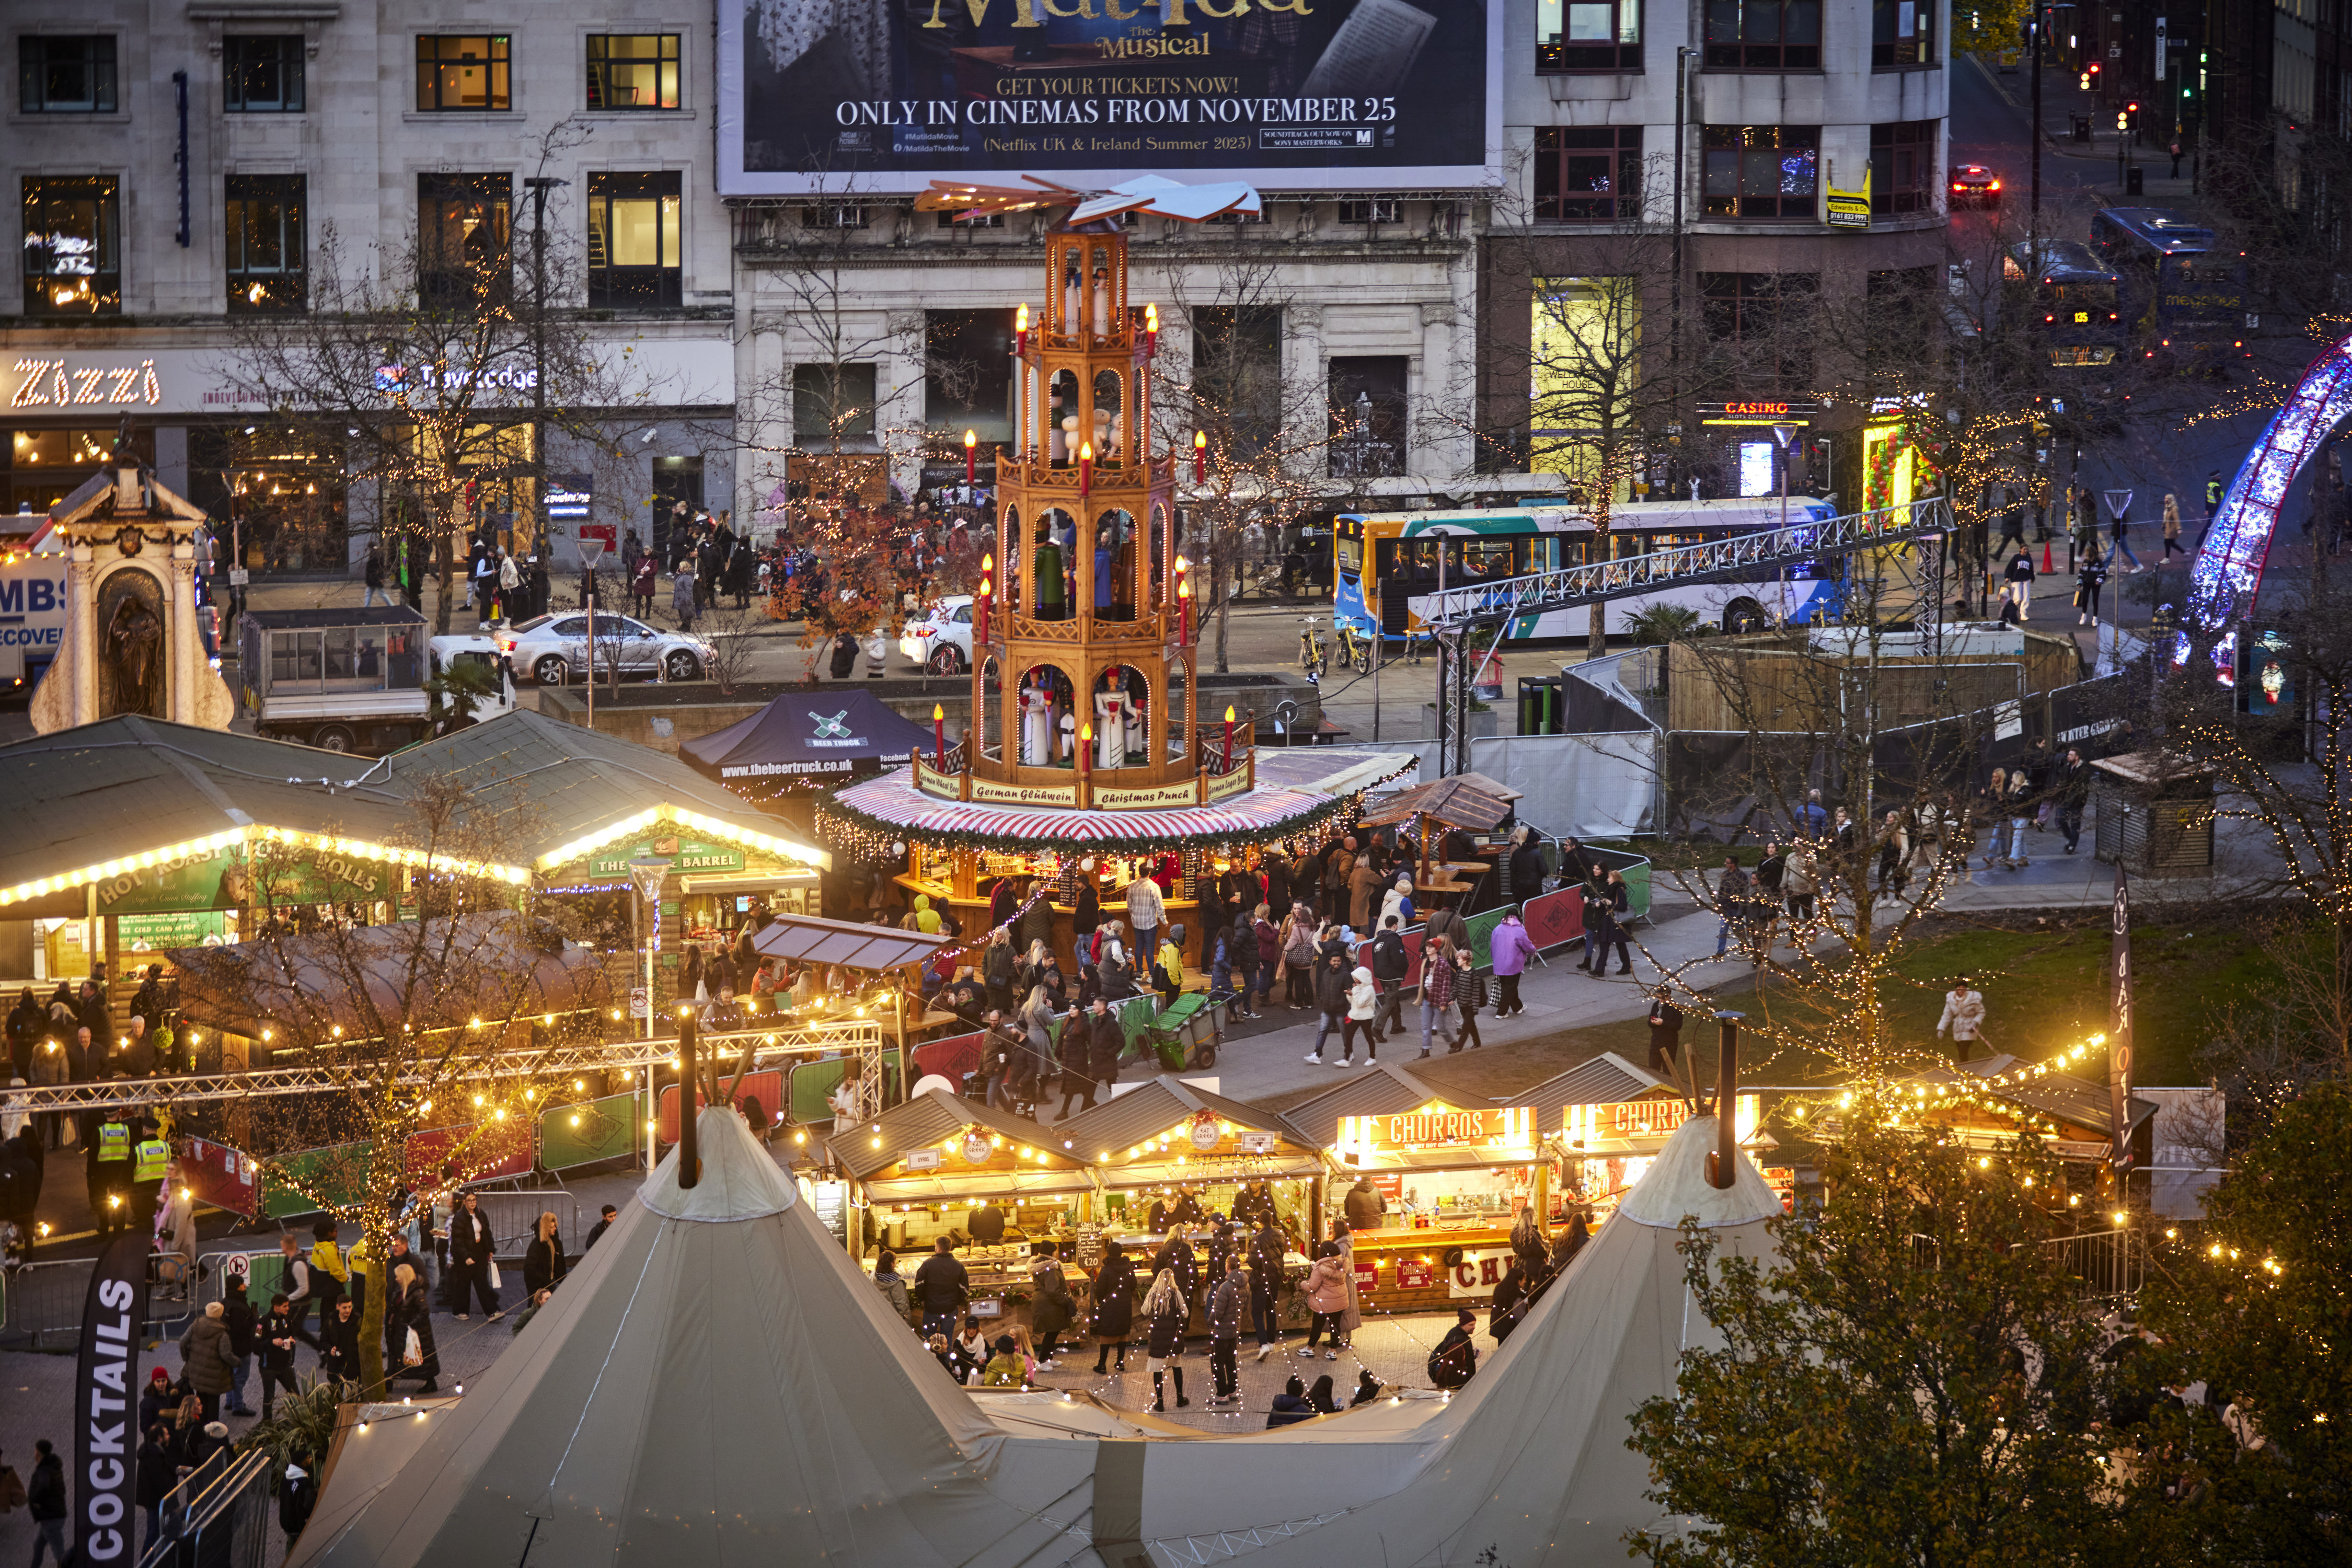 picture looking down on evening street scene with market stalls, lights twinkling a tall Christmas wooden windmill